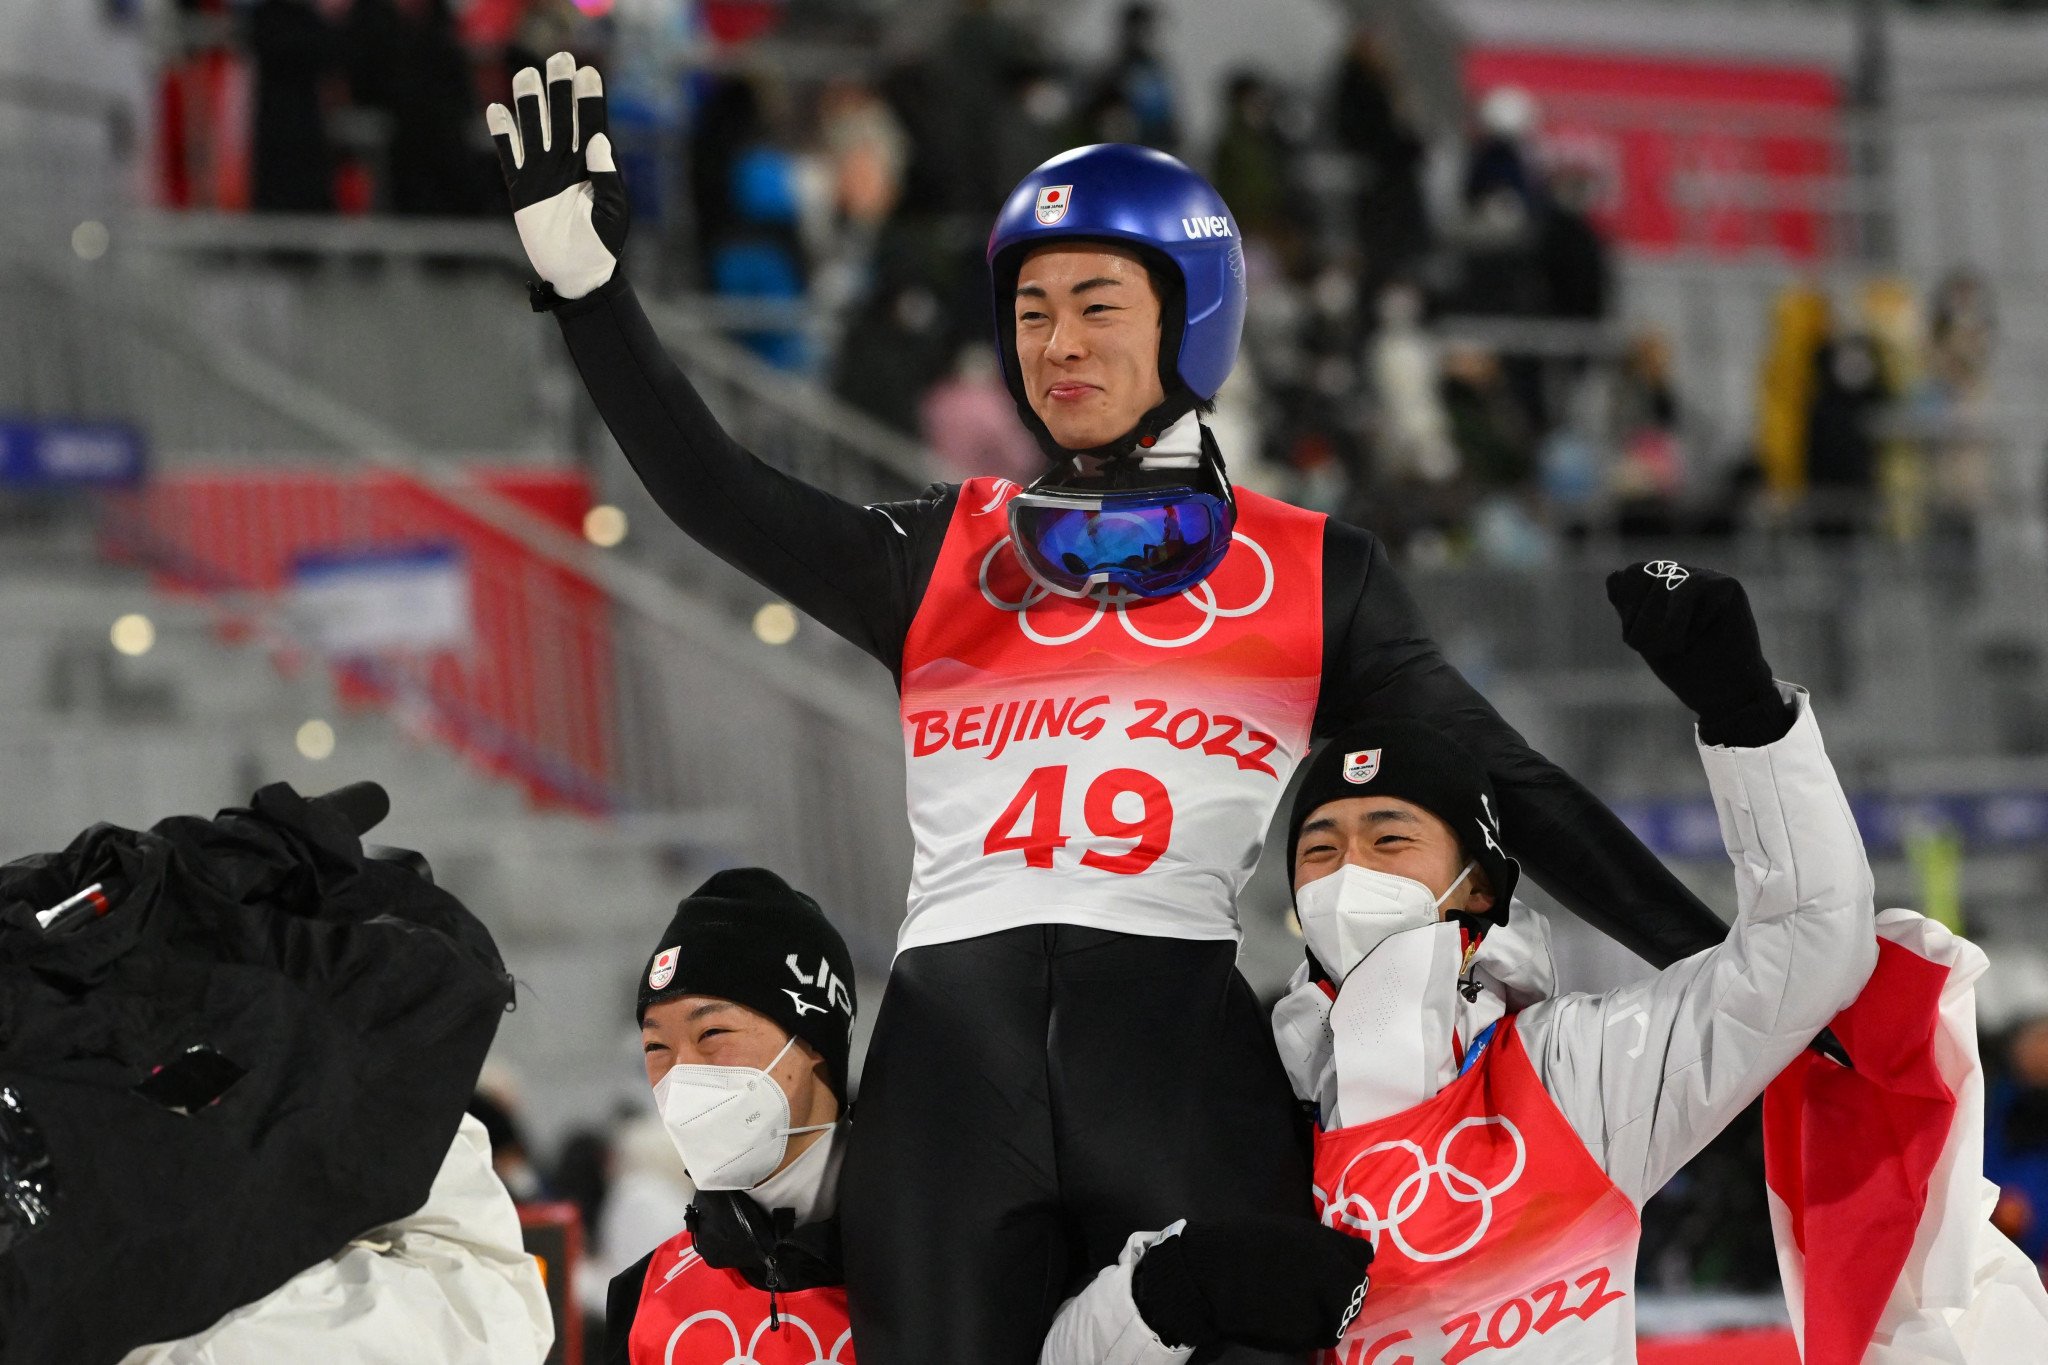 Ryoyu Kobayashi leads the overall World Cup standings ahead of the final event of the season ©Getty Images